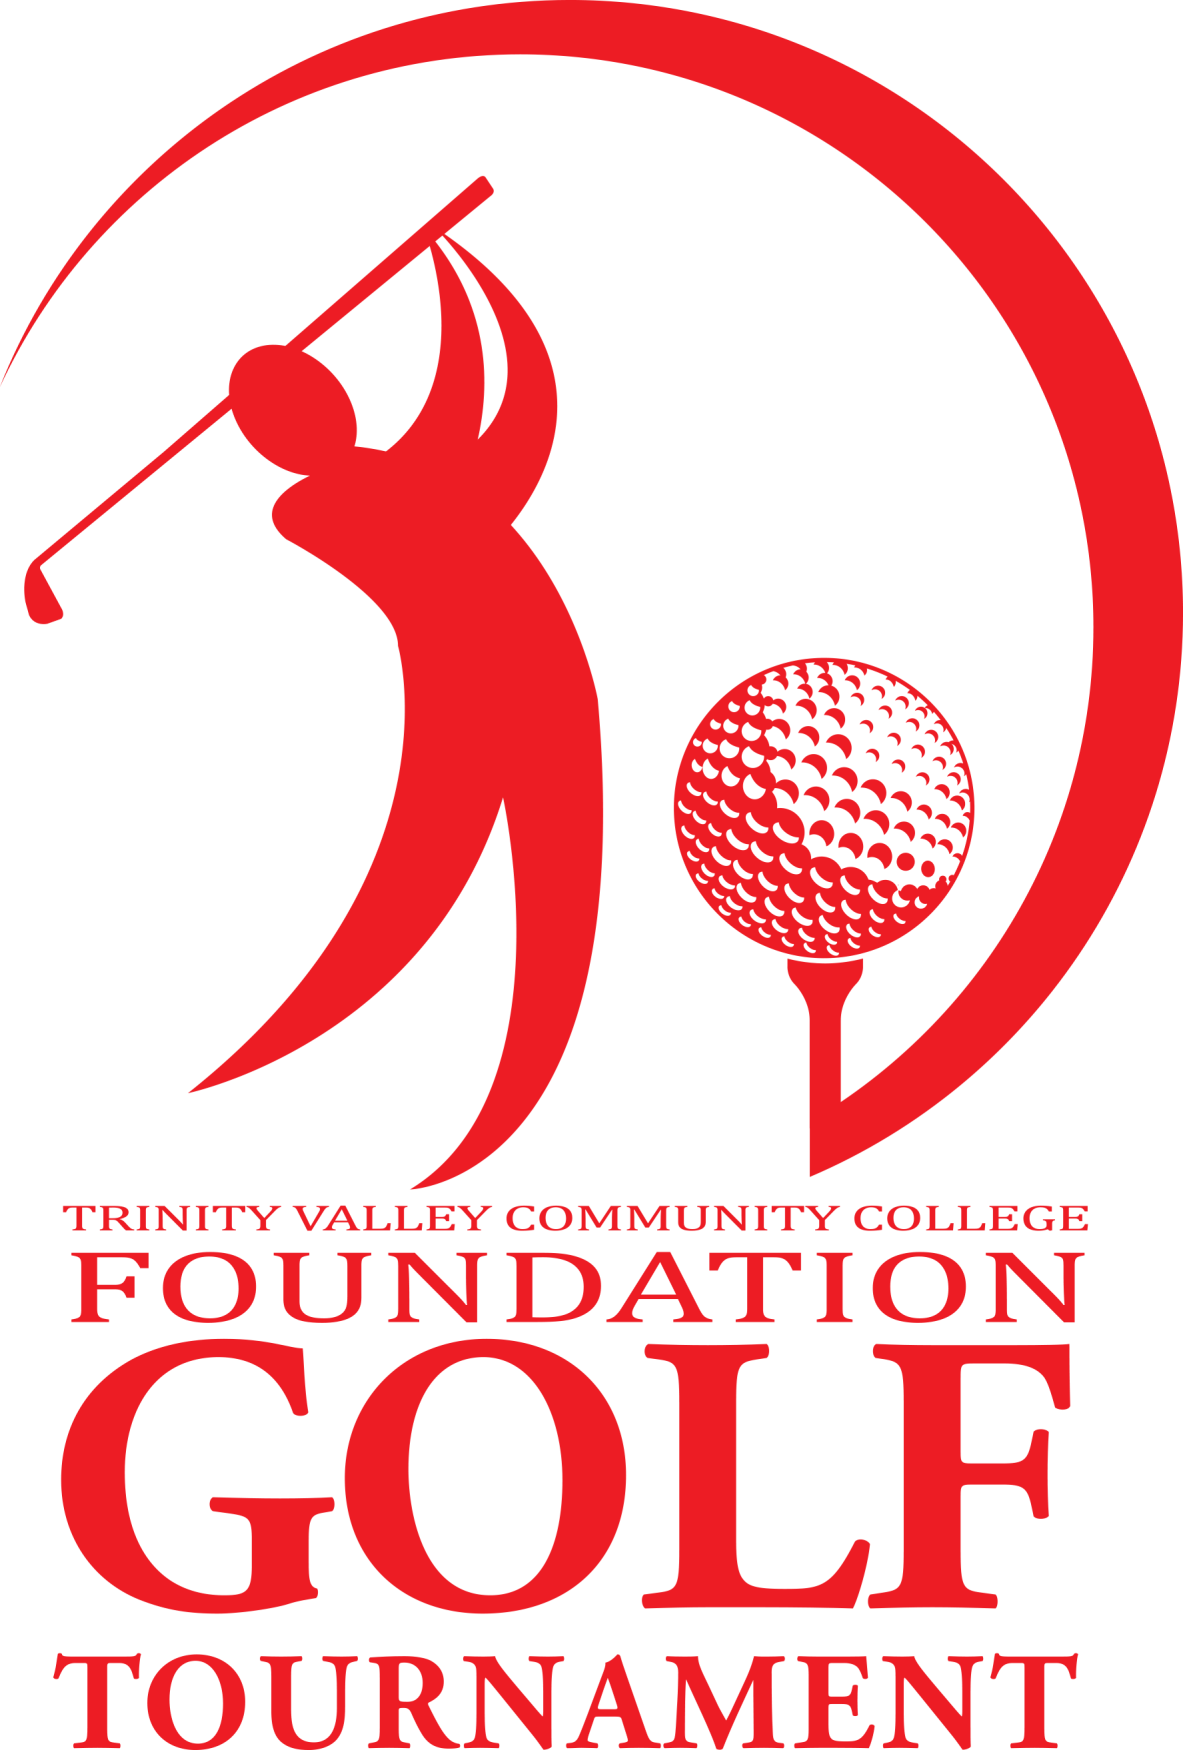 golf foundation tvcc sports valley tourney trinity annual tournament rogers athensreview county